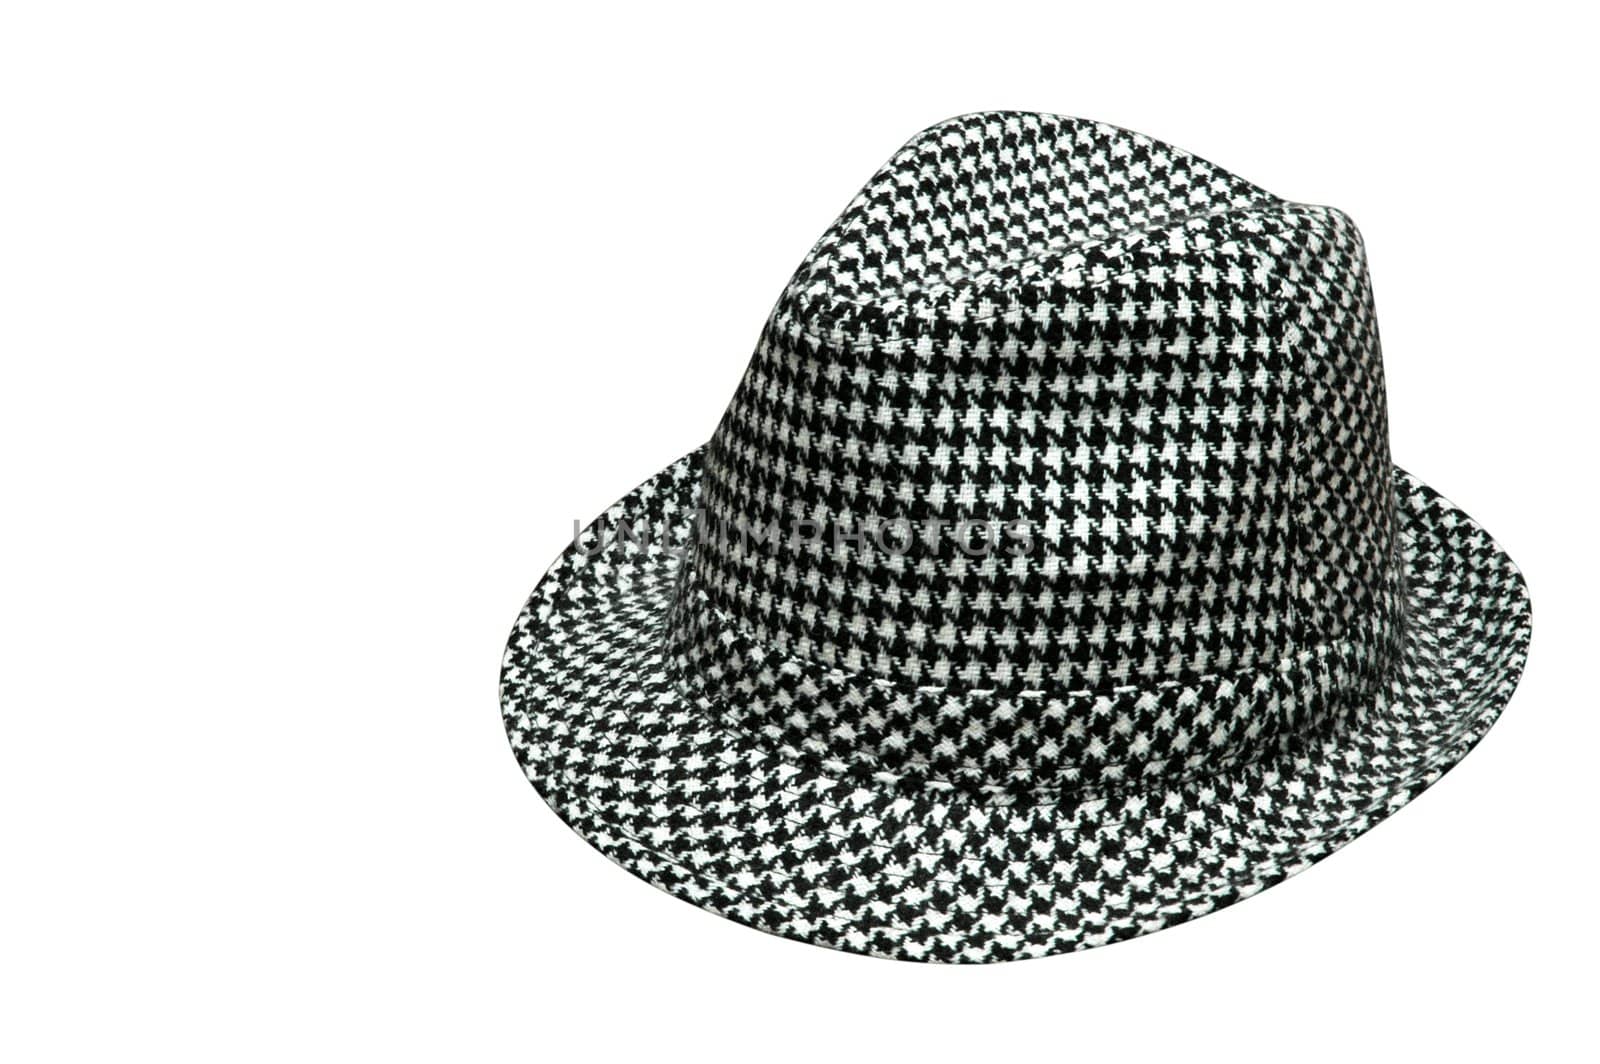 Houndstooth hat isolated on white background with clipping path.